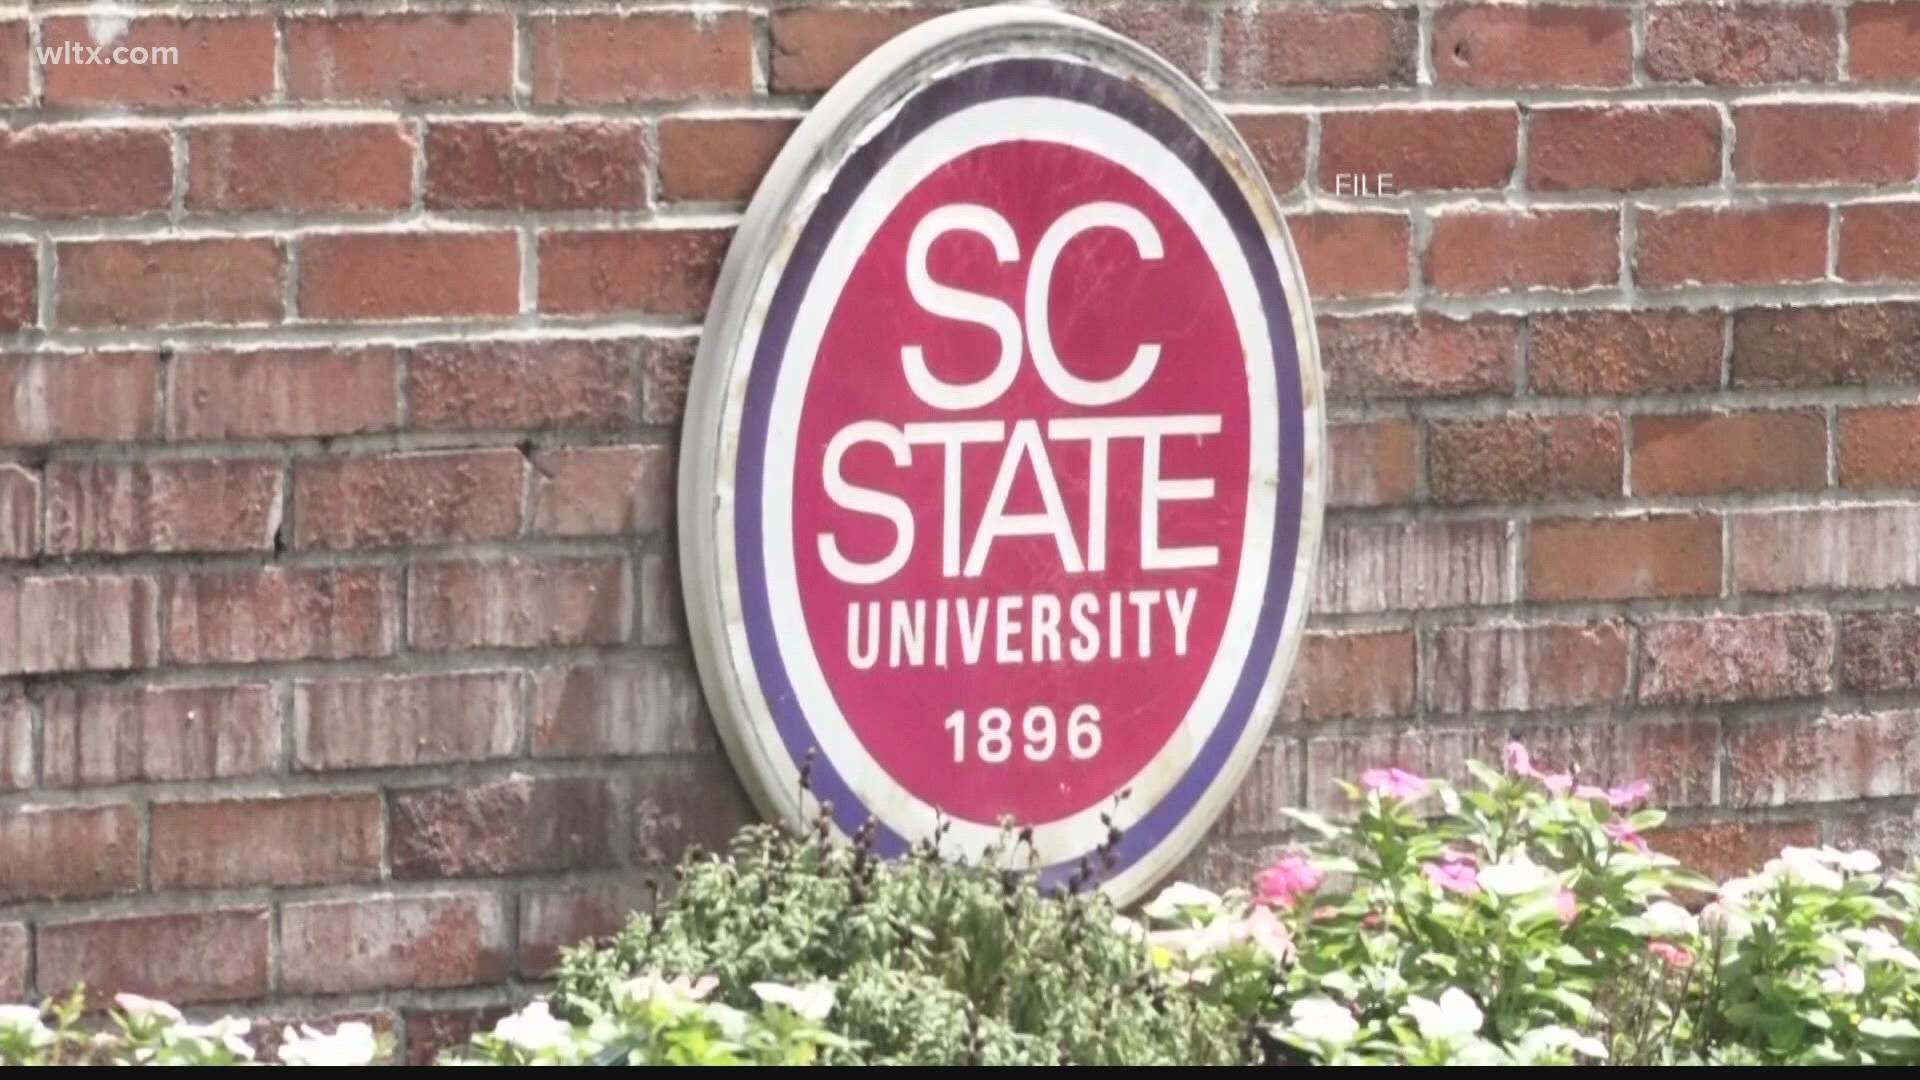 Several SC HBCUs are taking part in a collaboration aimed at increasing enrollment and improving the college experience for students.